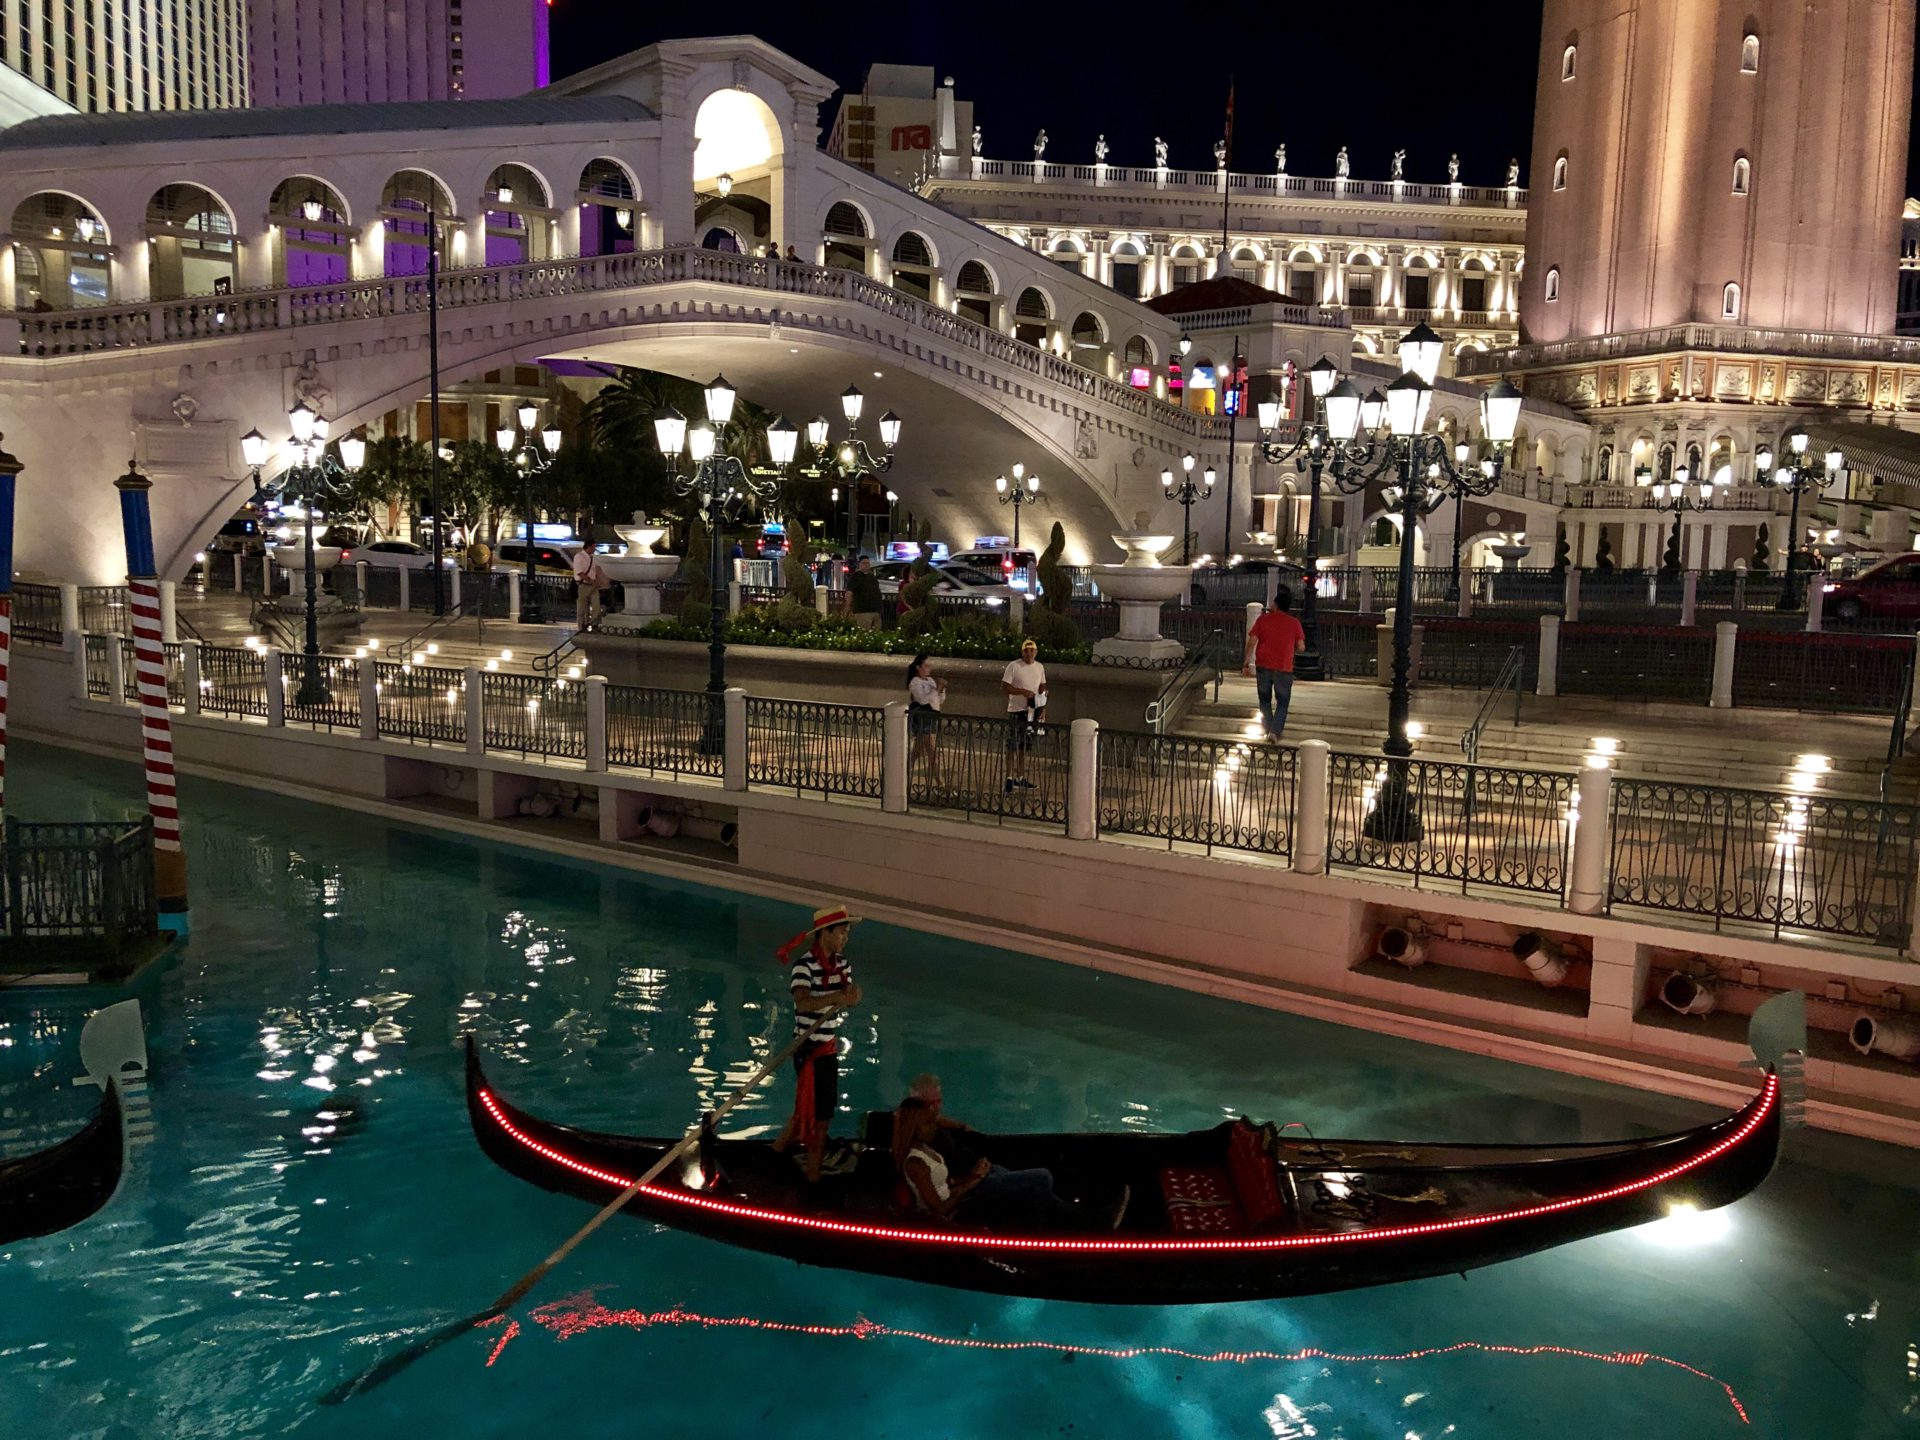 The Venetian Gondola Ride at night with softly lit canals reflecting the shimmering lights of surrounding architecture, creating a magical ambiance reminiscent of Venice under the stars.